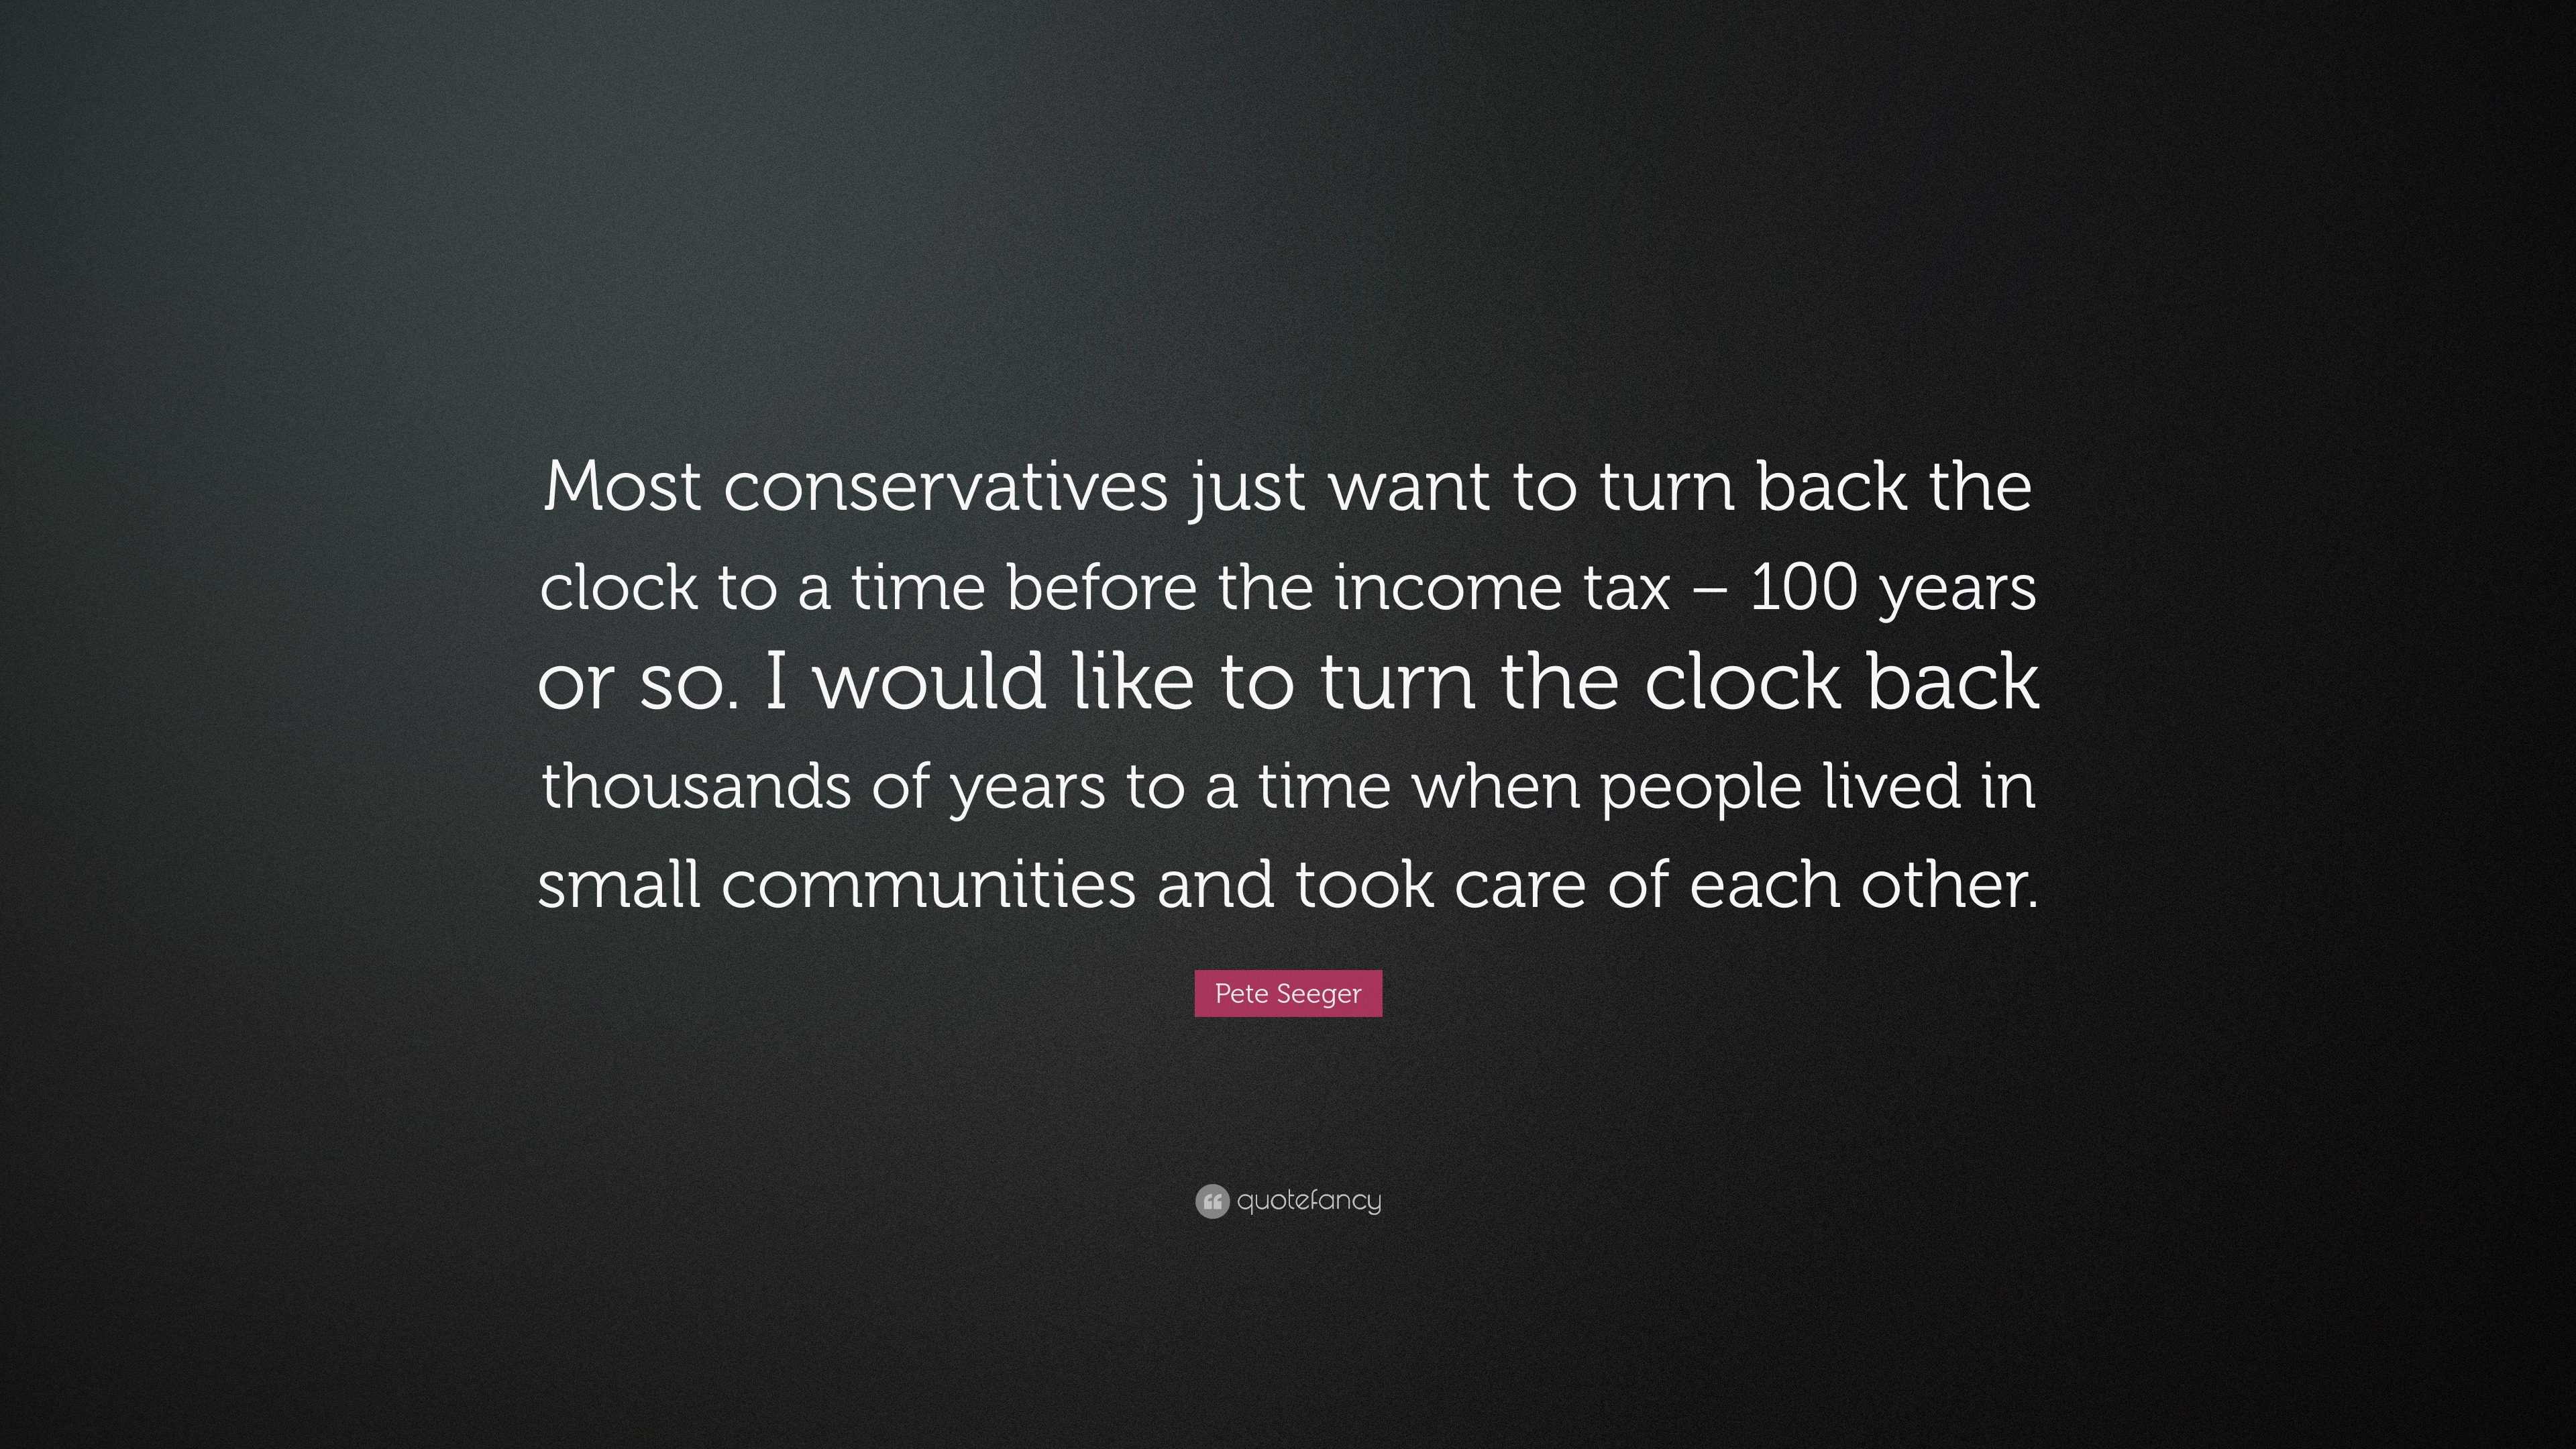 Pete Seeger Quote Most Conservatives Just Want To Turn Back The Clock To A Time Before The Income Tax 100 Years Or So I Would Like To T 10 Wallpapers Quotefancy